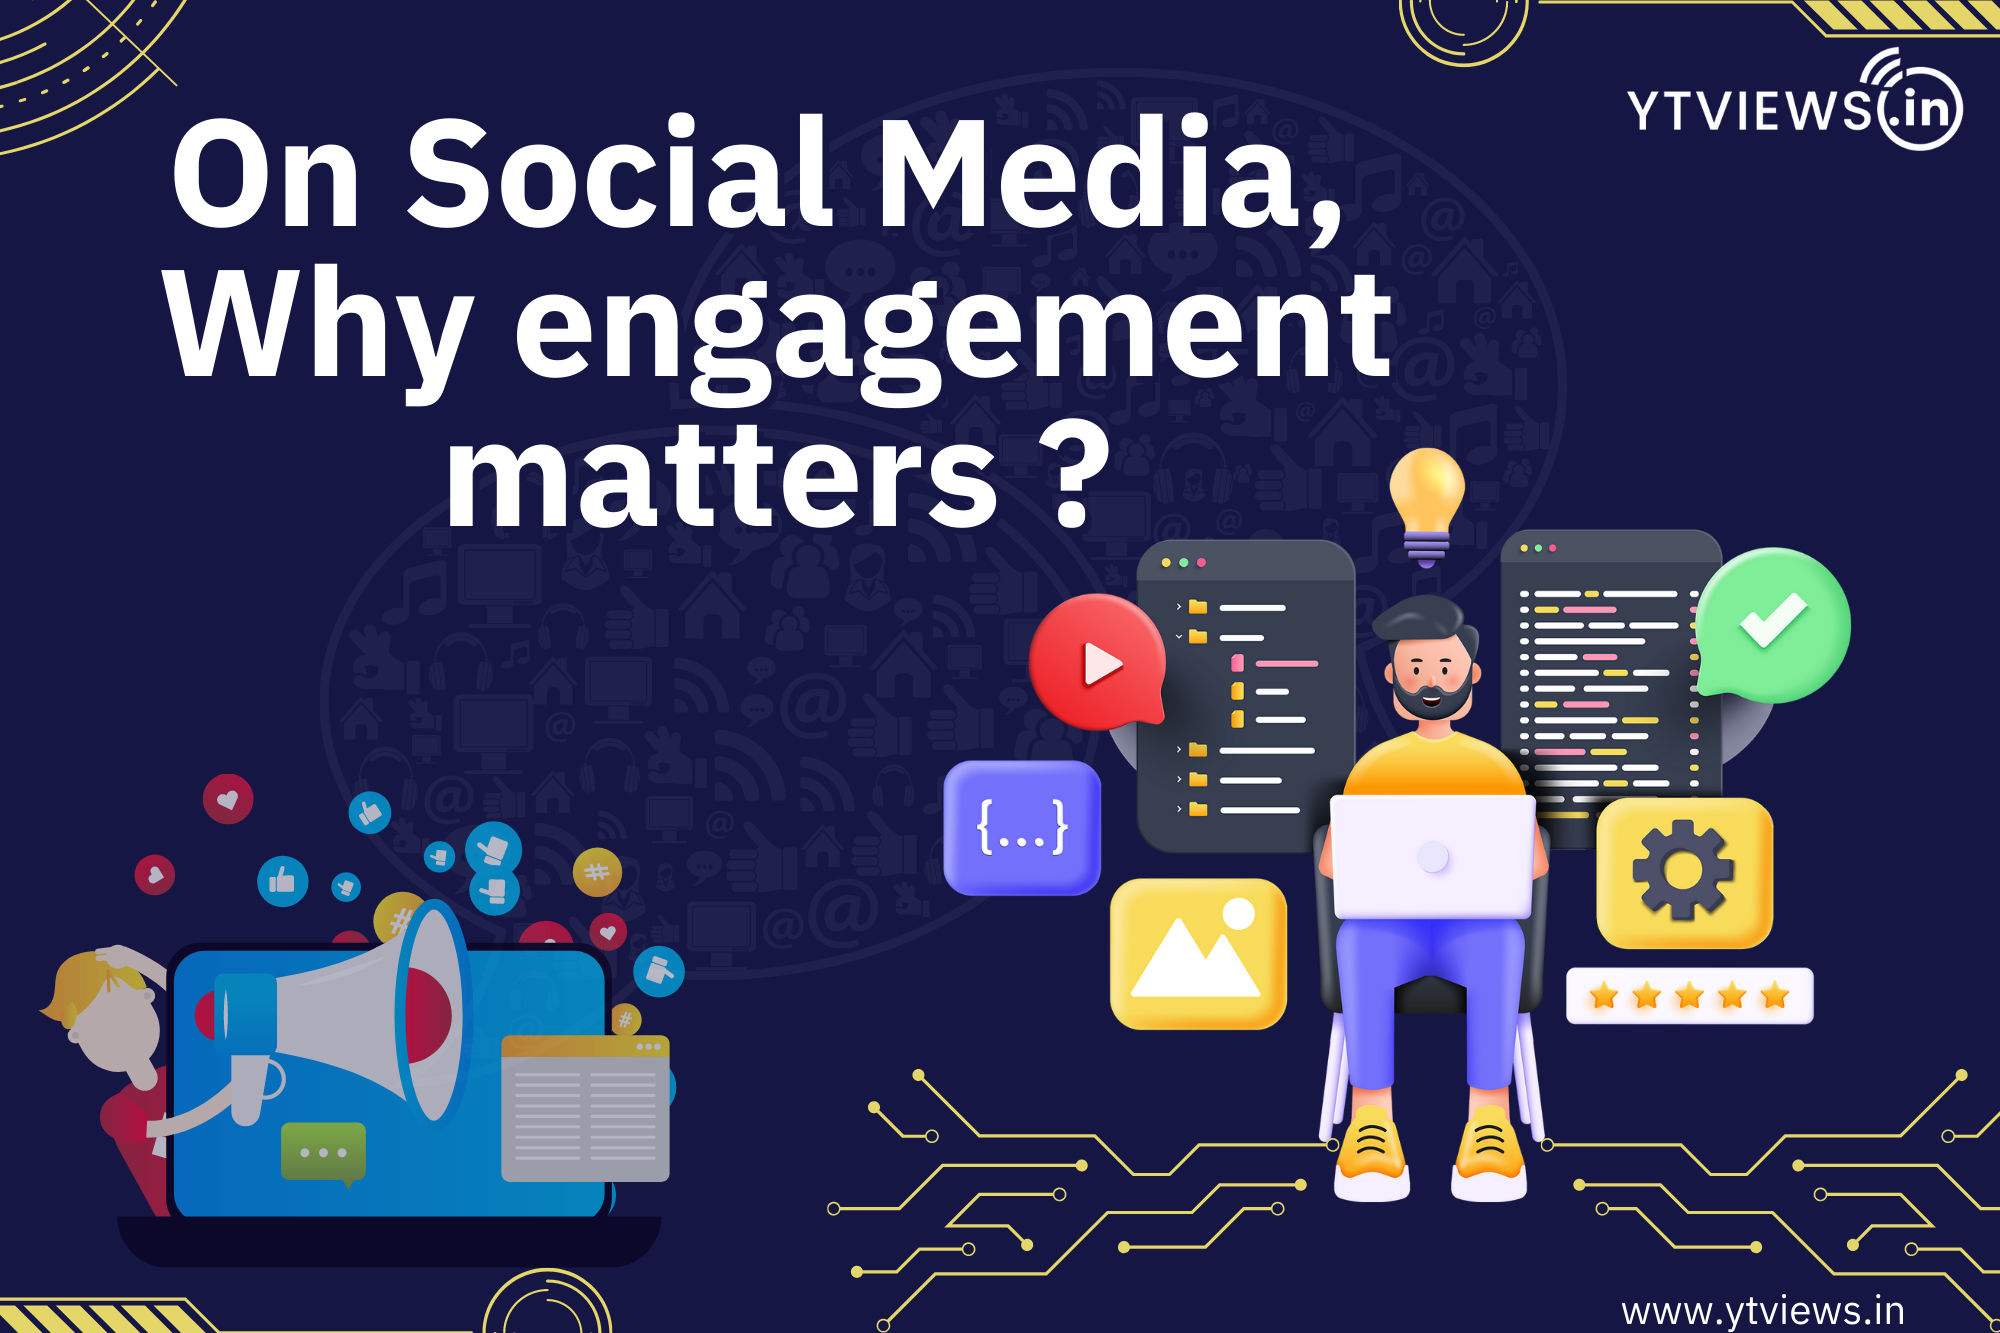 Building a strong social media presence: why engagement matters